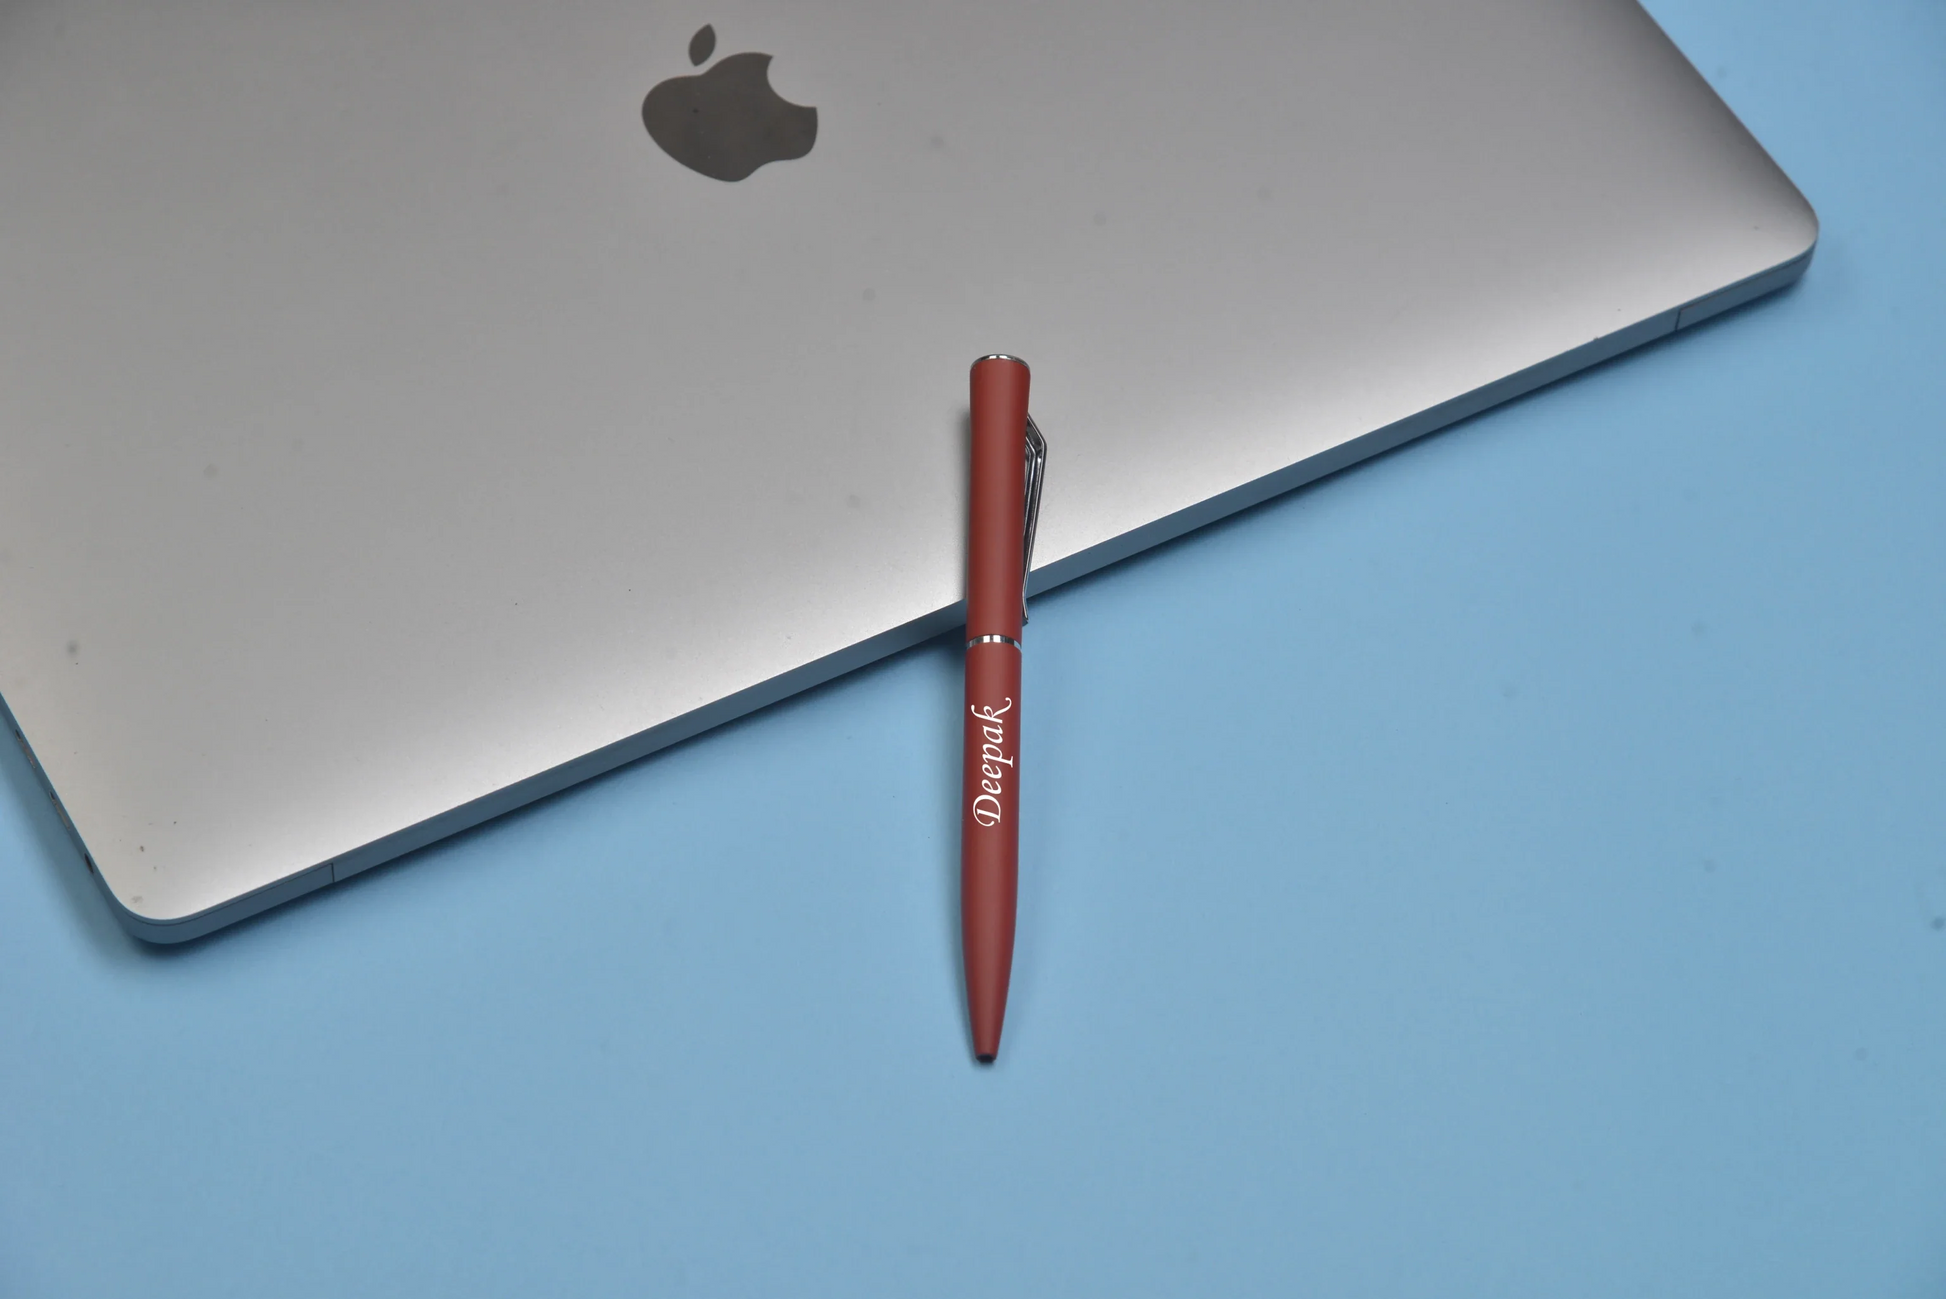 "Get the job done with our durable and reliable pen. A must-have for professionals, students, and busy individuals."